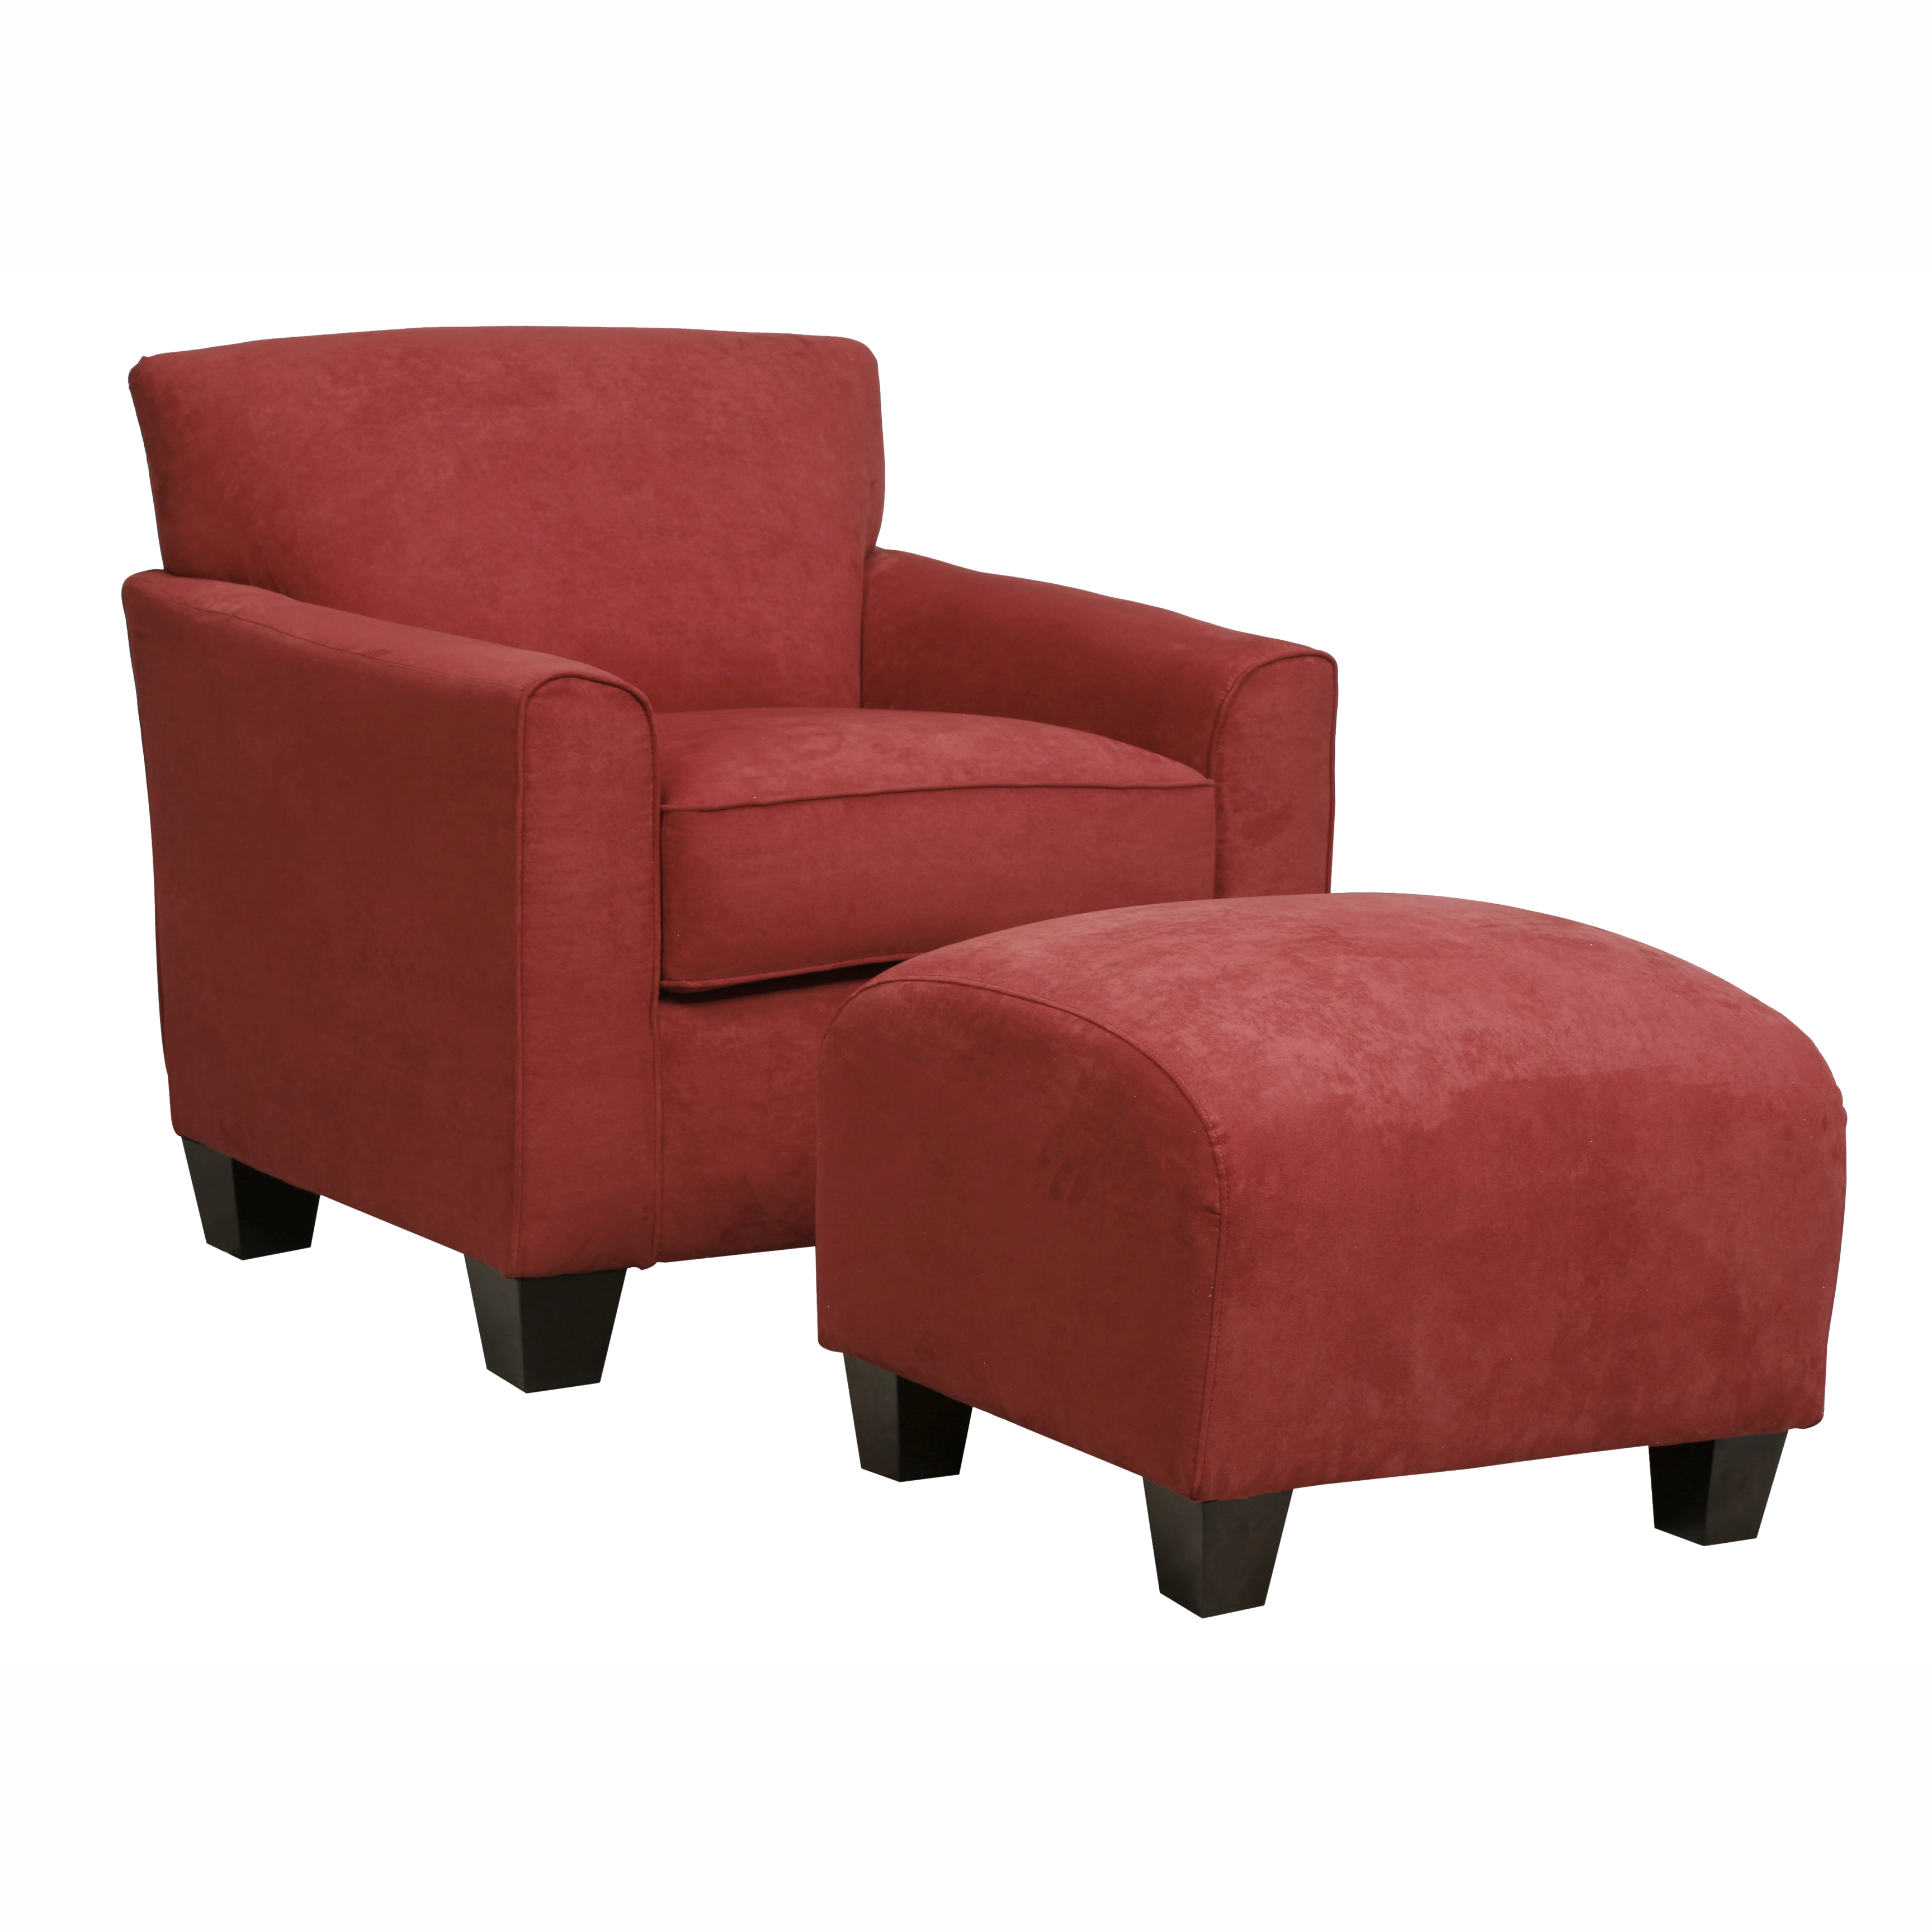 handy living park avenue crimson red hand tied chair and portfolio ott six piece accent table set free shipping today unfinished furniture childrens bedside pottery barn standing